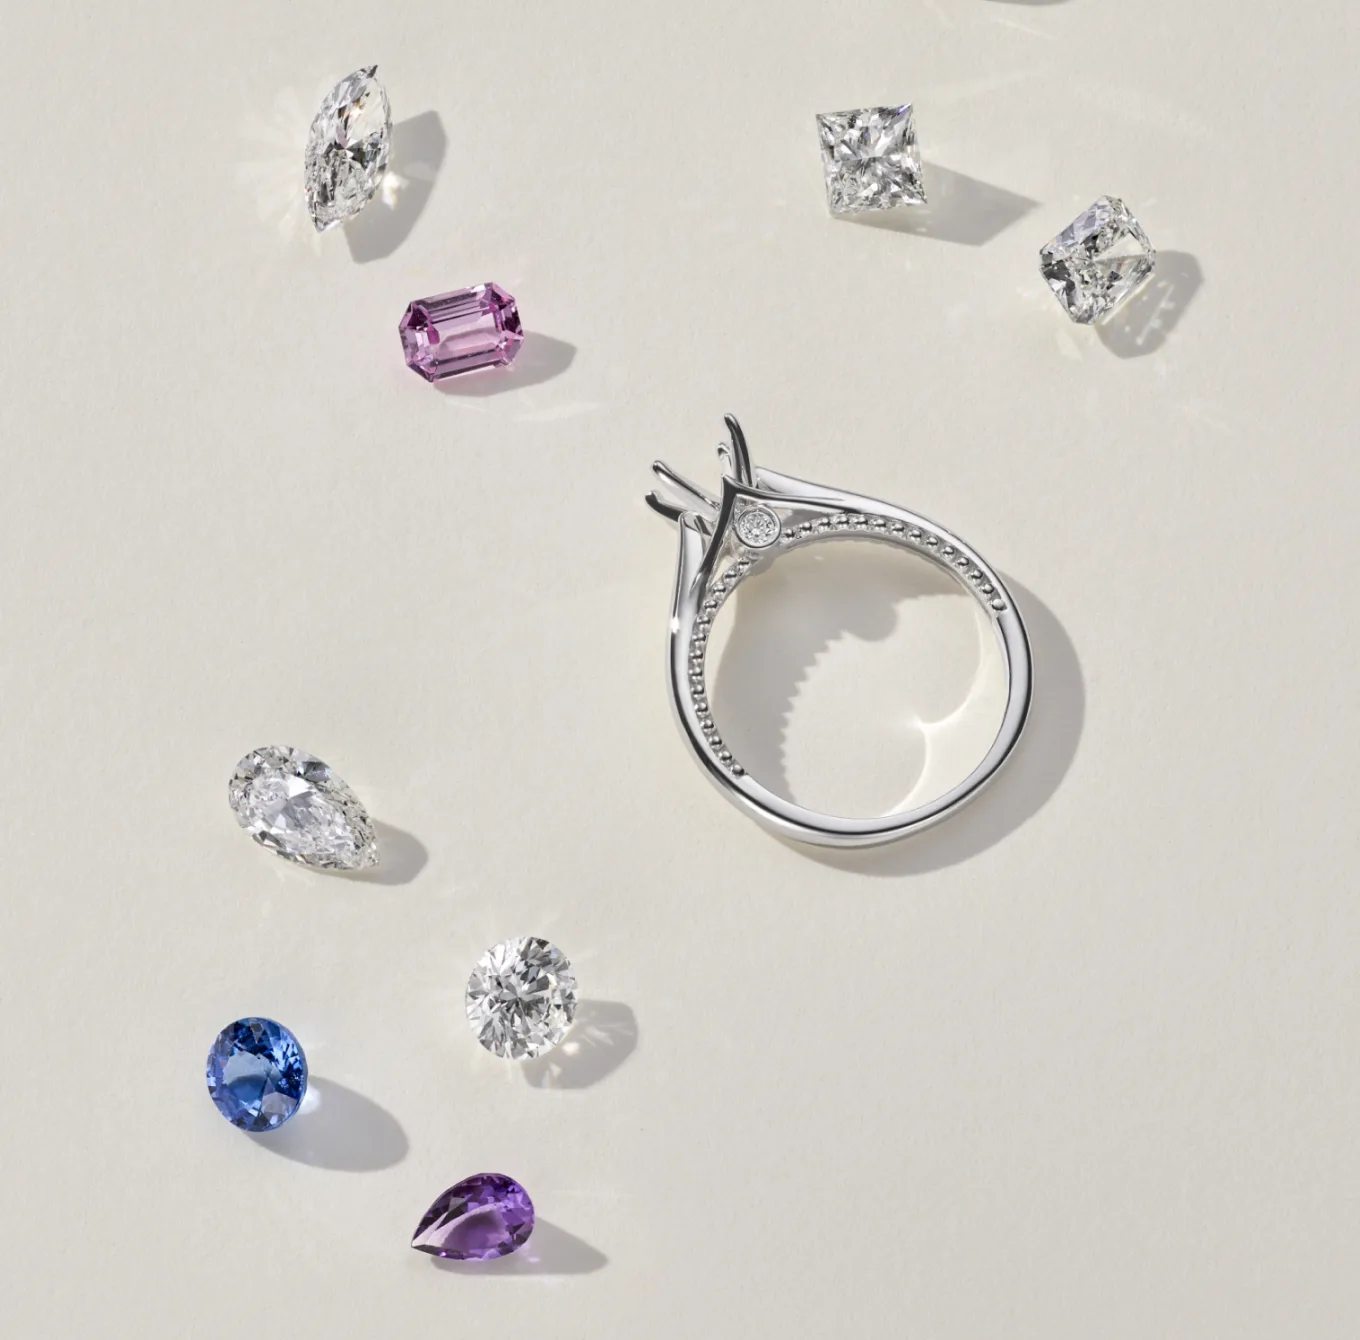 In the center of the image is a solitaire engagement ring. It has a white gold band and a single, round diamond in a prong setting. The diamond is likely cut in a brilliant round cut, which is the most popular cut for diamonds because it maximizes sparkle. Scattered around the engagement ring are several loose diamonds. These diamonds vary in size and may be used to create a custom engagement ring.

Hidden Milgrain Engagement Ring
This sleek 14-karat white gold engagement ring features a simple top-down view with ornate details hidden along the sides. Milgrain lines the profile, giving way to a natural diamond accent on either side of the setting. Add the center stone of your dreams to complete this elegant design. For more information on selecting your center stone, Live Chat online, call a customer service representative at 1-866-467-4263, or visit one of our store locations.